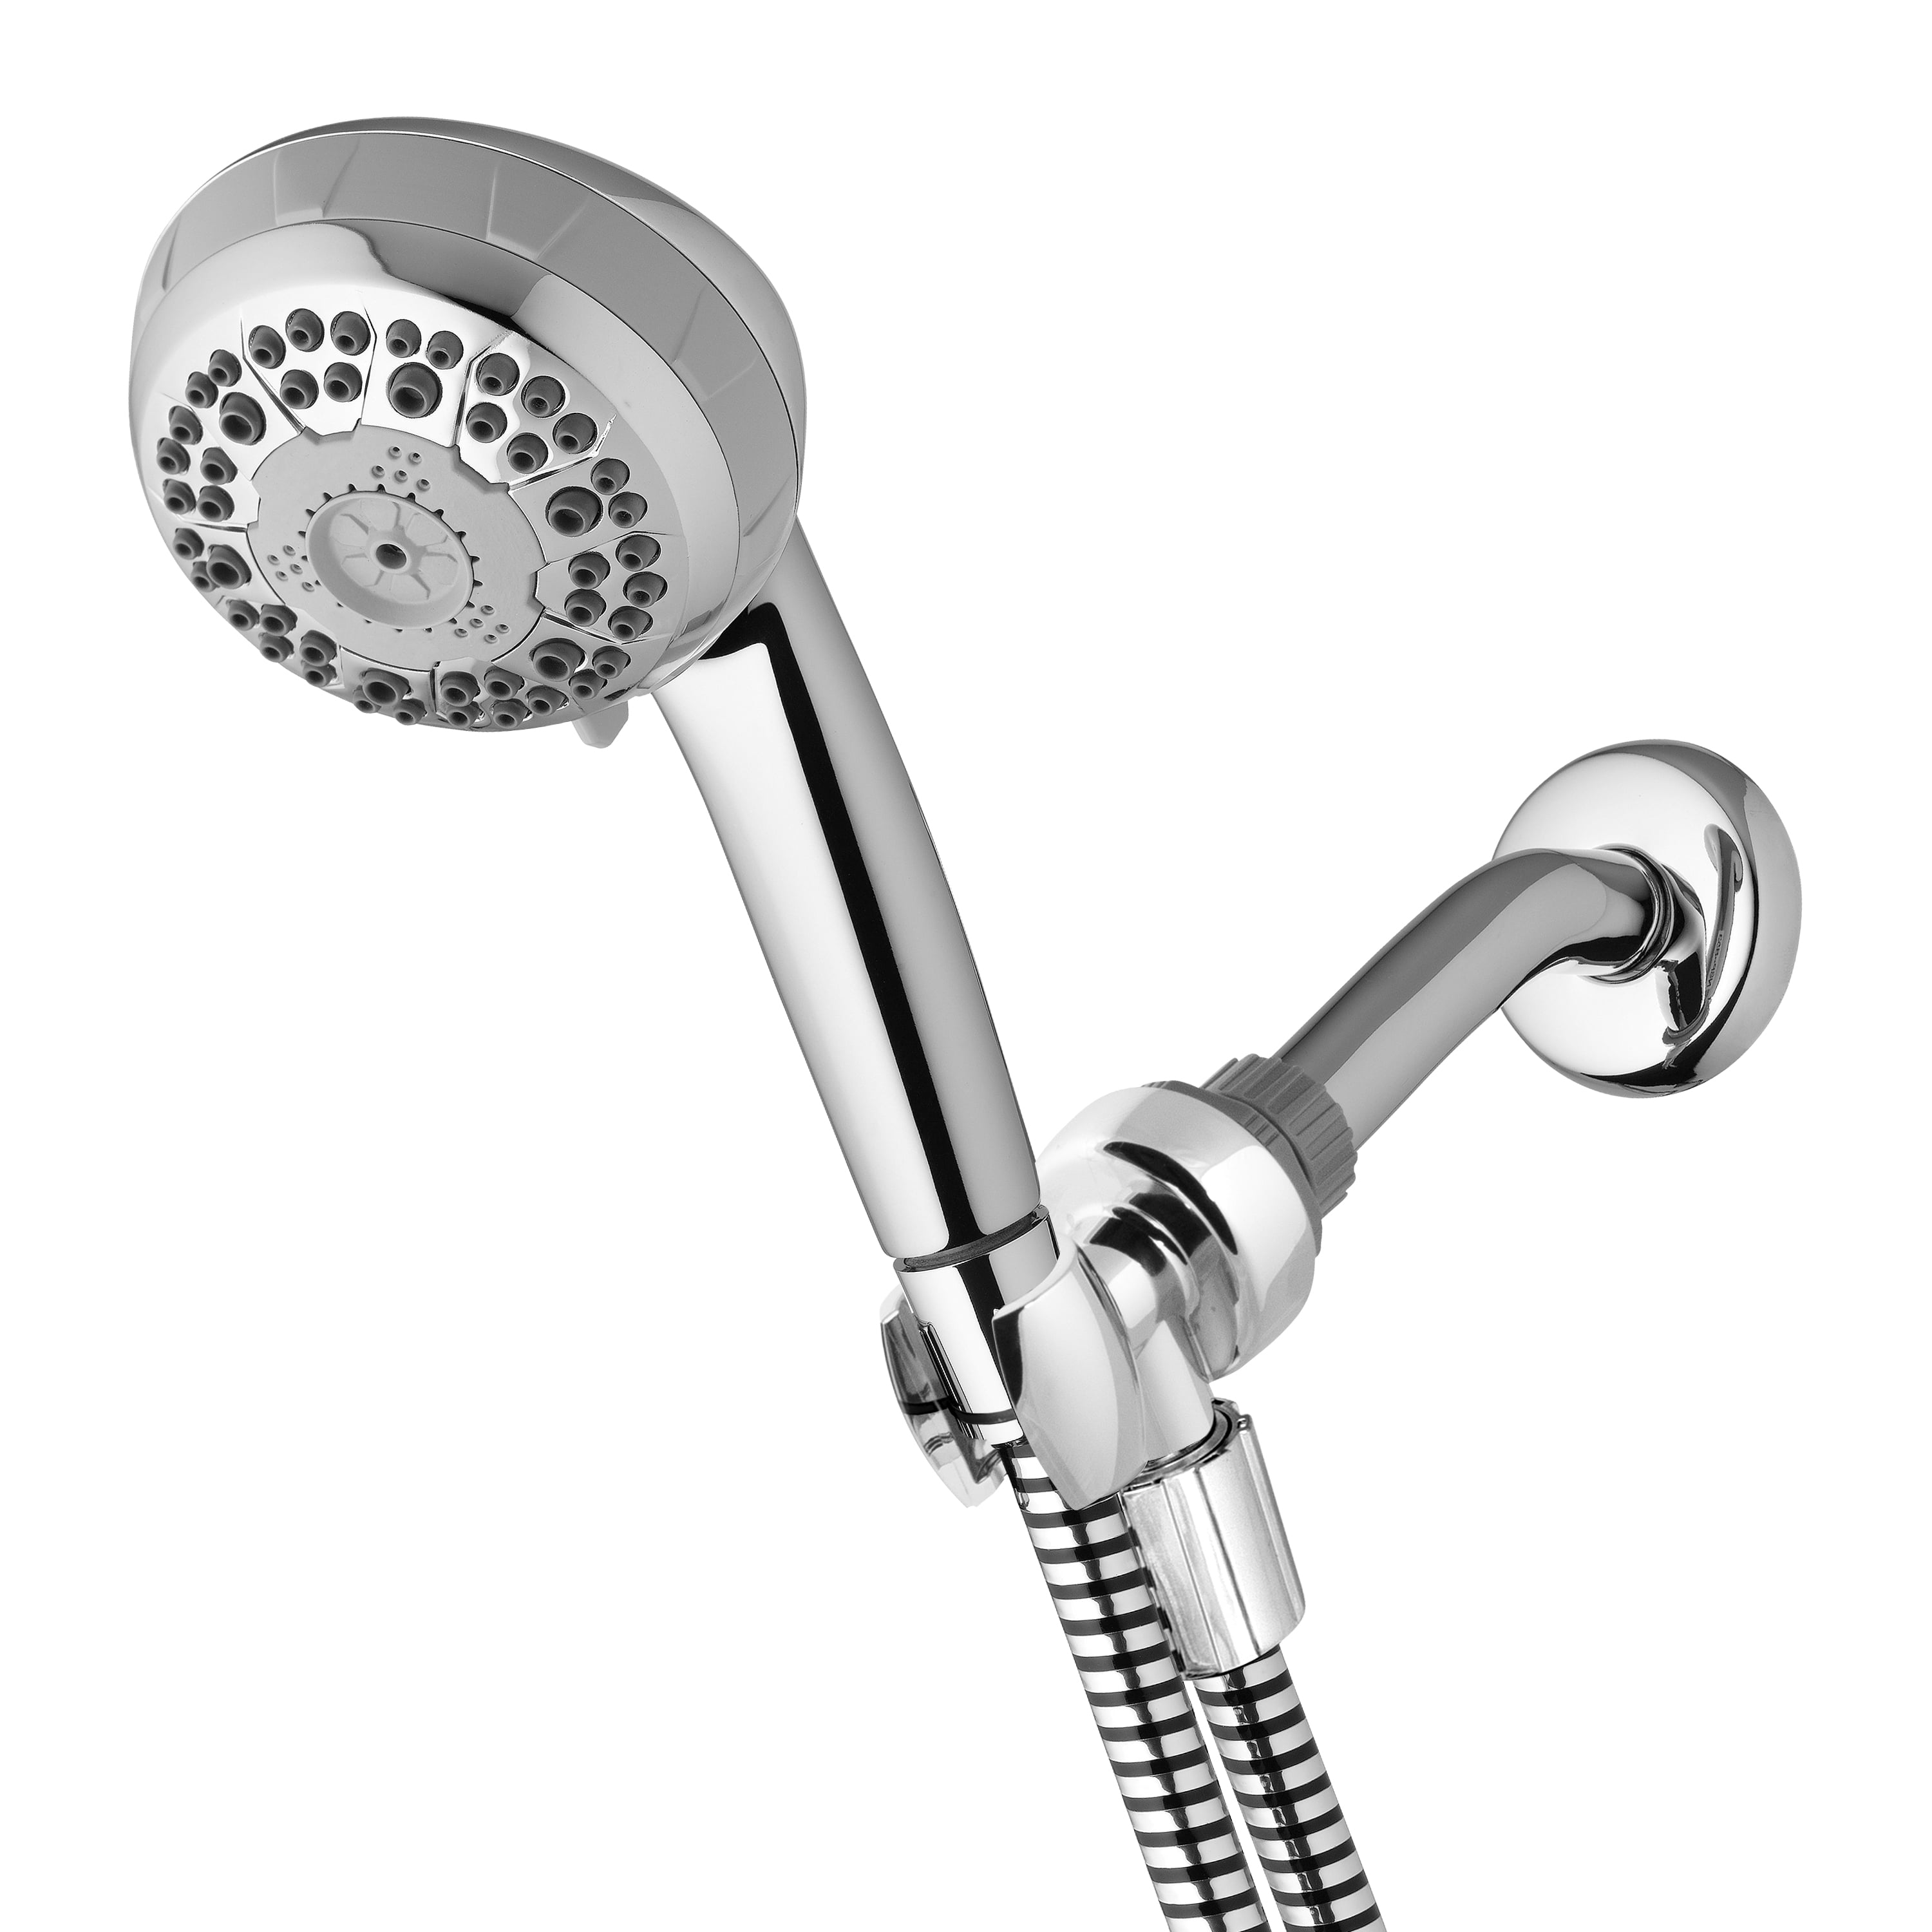 Waterpik LBT-563M High Pressure Hand Held Shower Head With Hose 5-Mode Easy Select Chrome